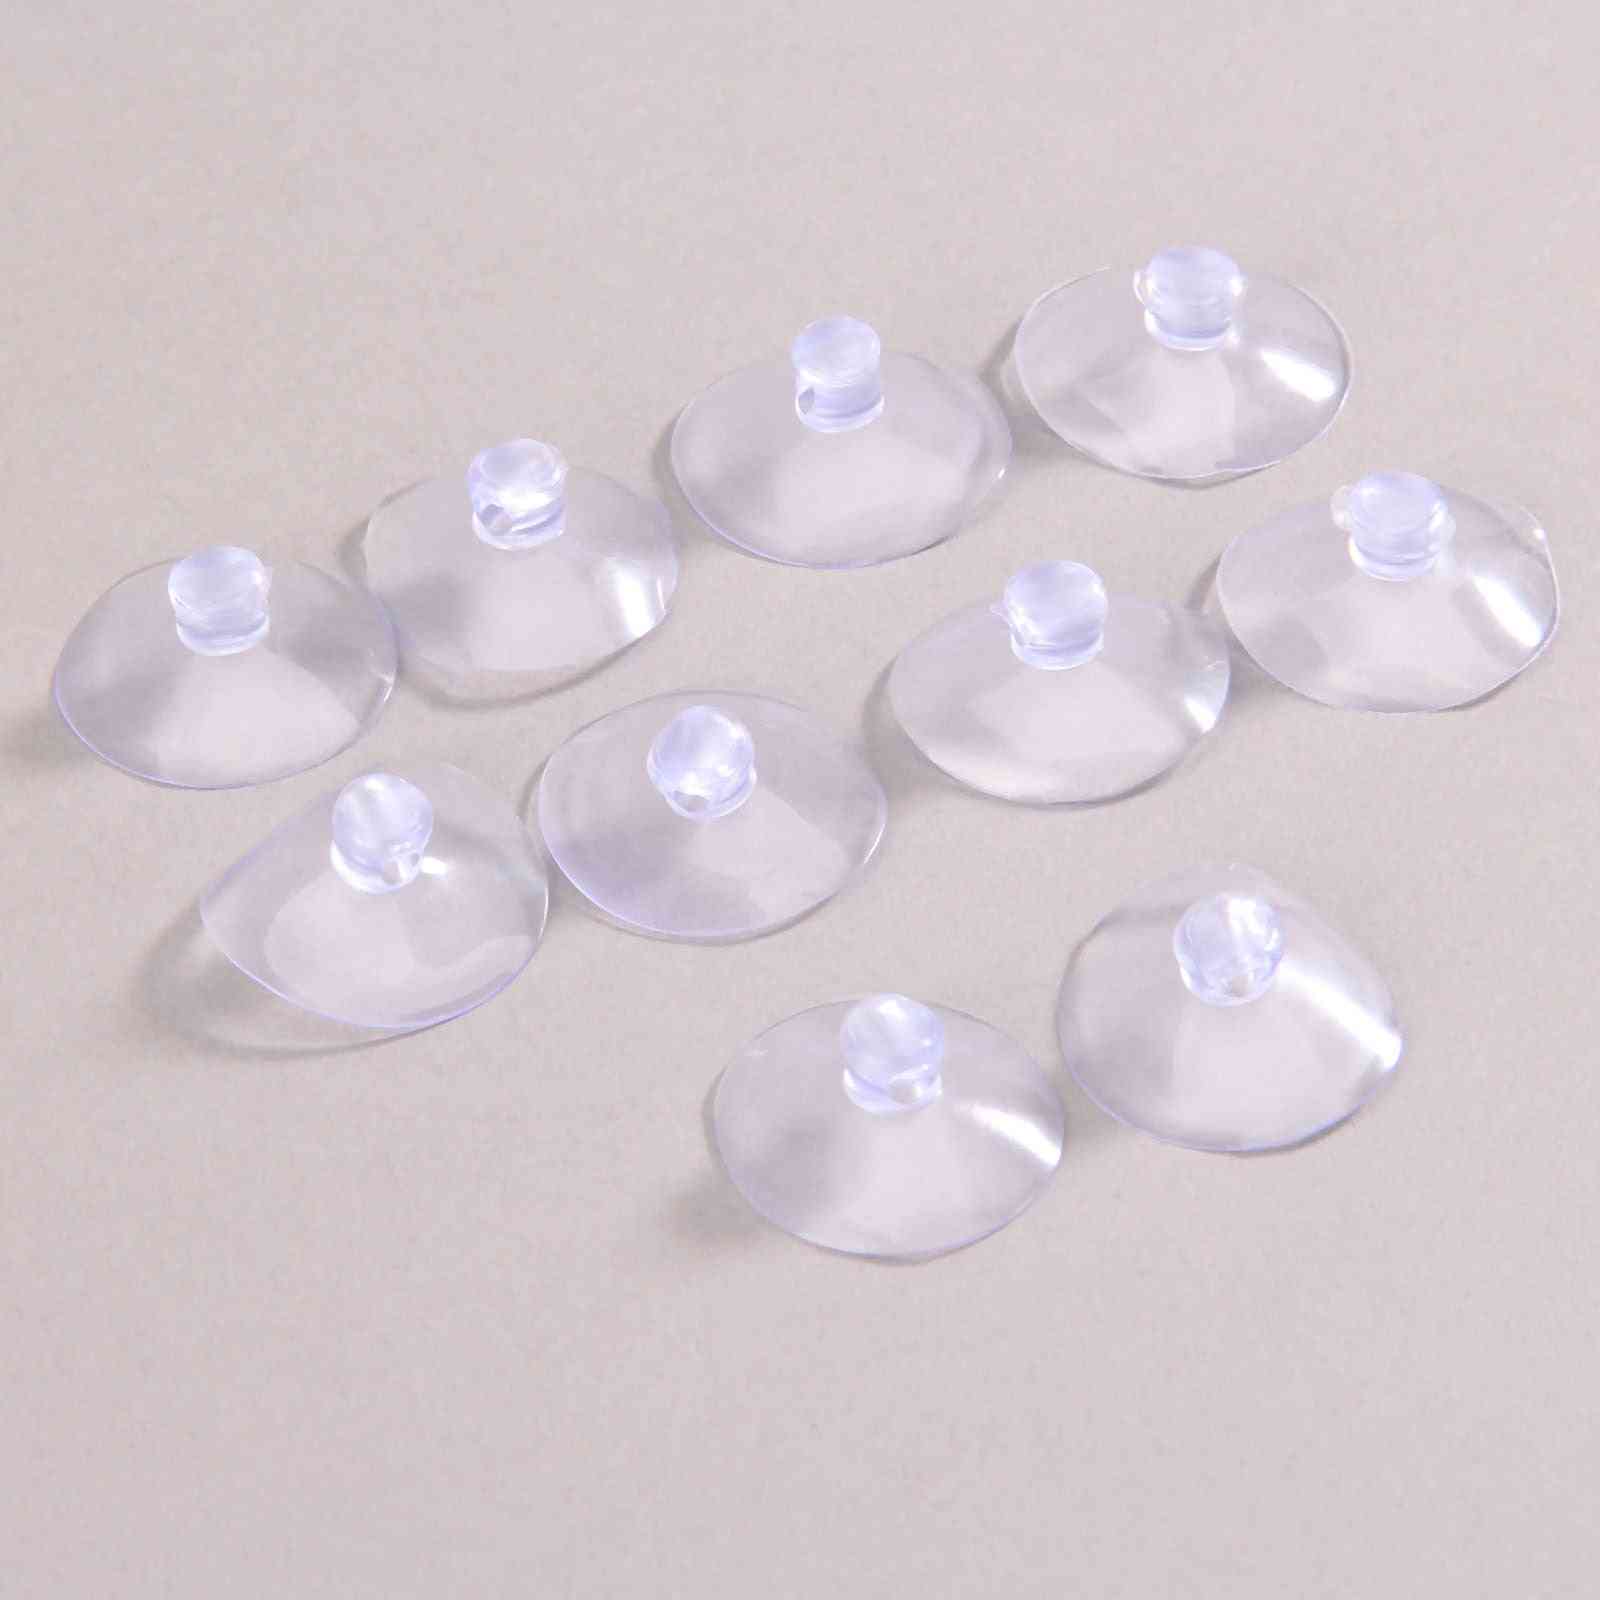 Clear Suction Cups- Hook For Window, Kitchen, Bathroom, Car And Glass